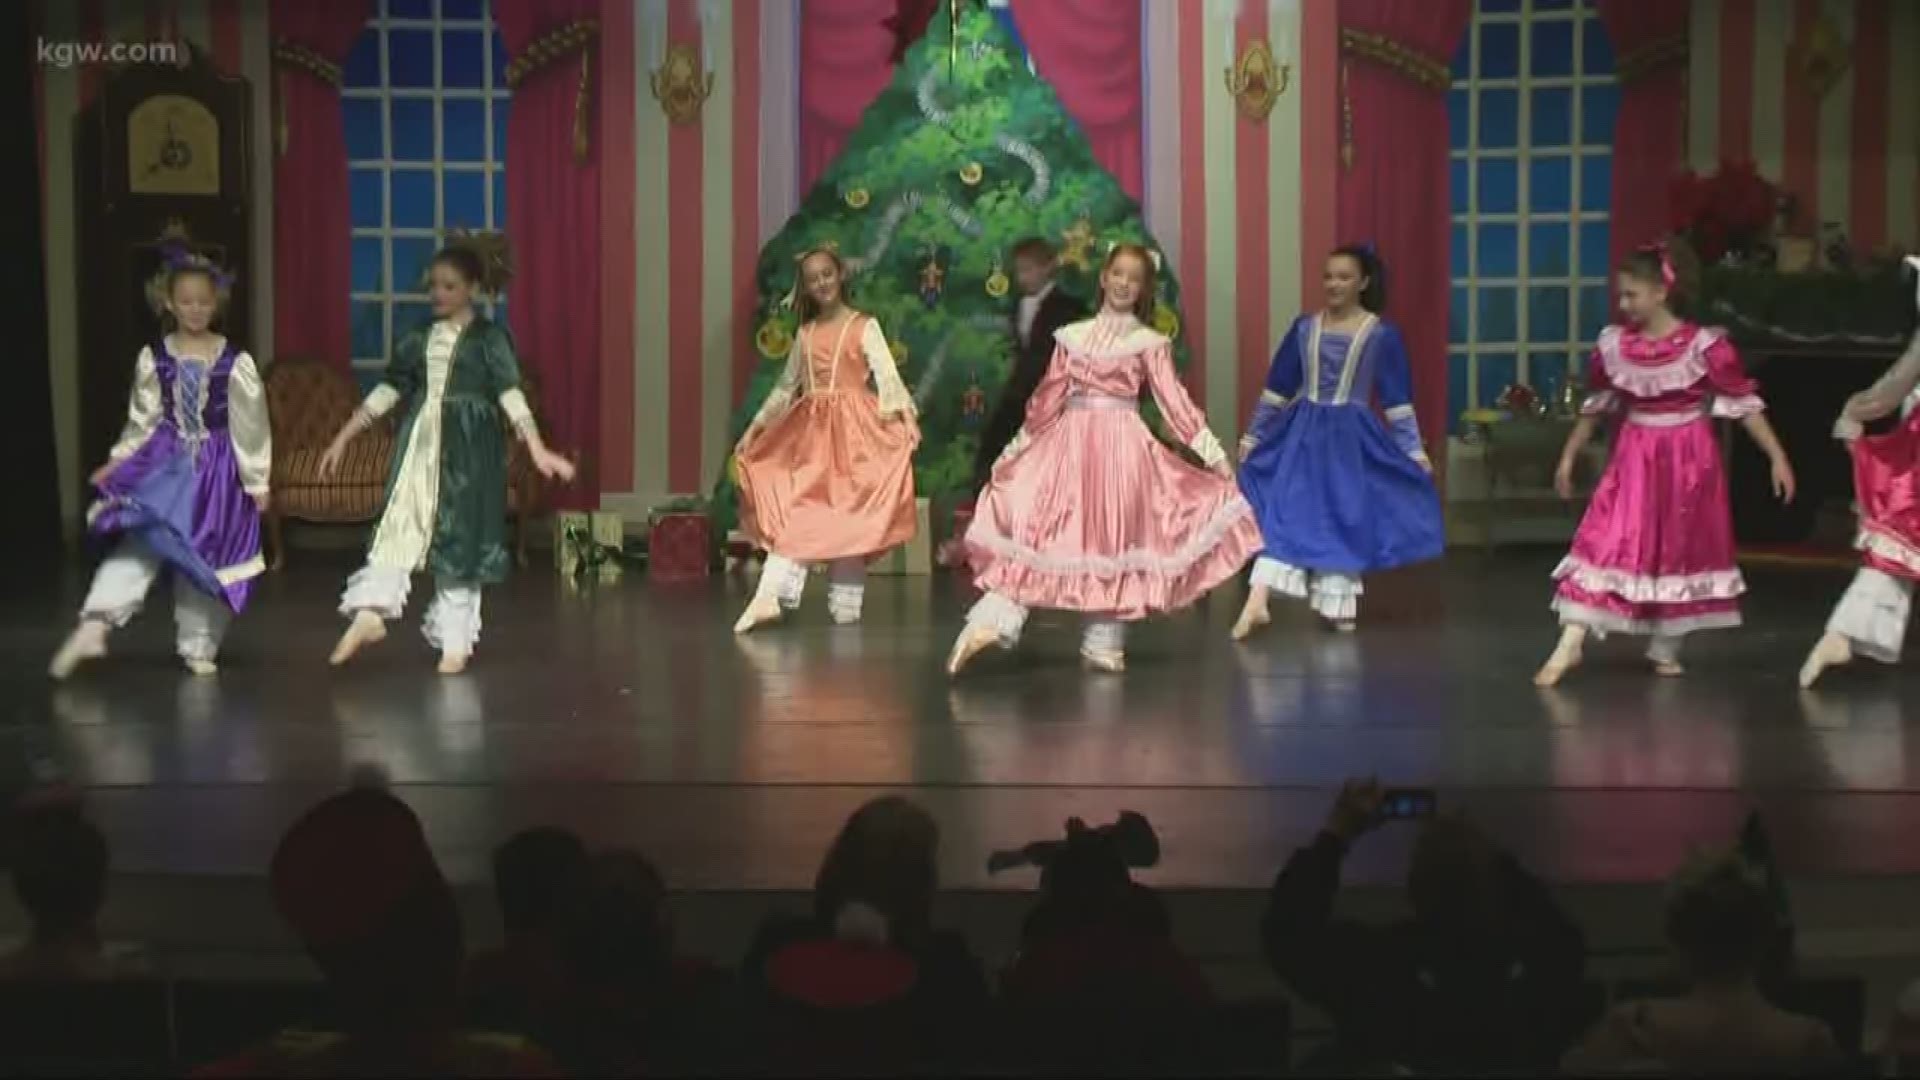 Out and About: The Nutcracker